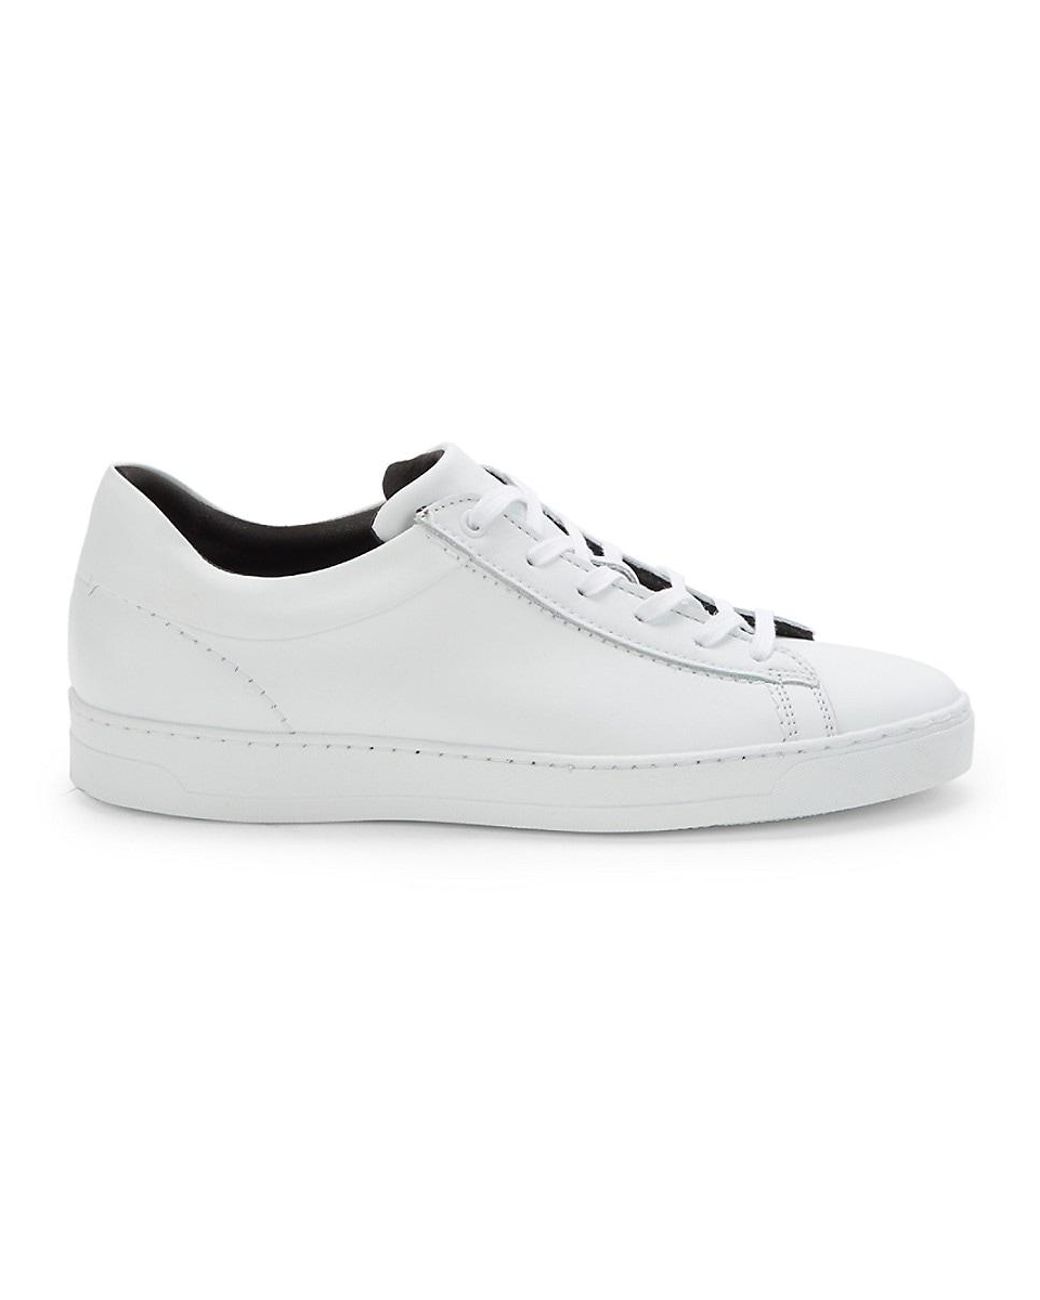 Bruno Magli Diego Leather Sneakers in White for Men | Lyst